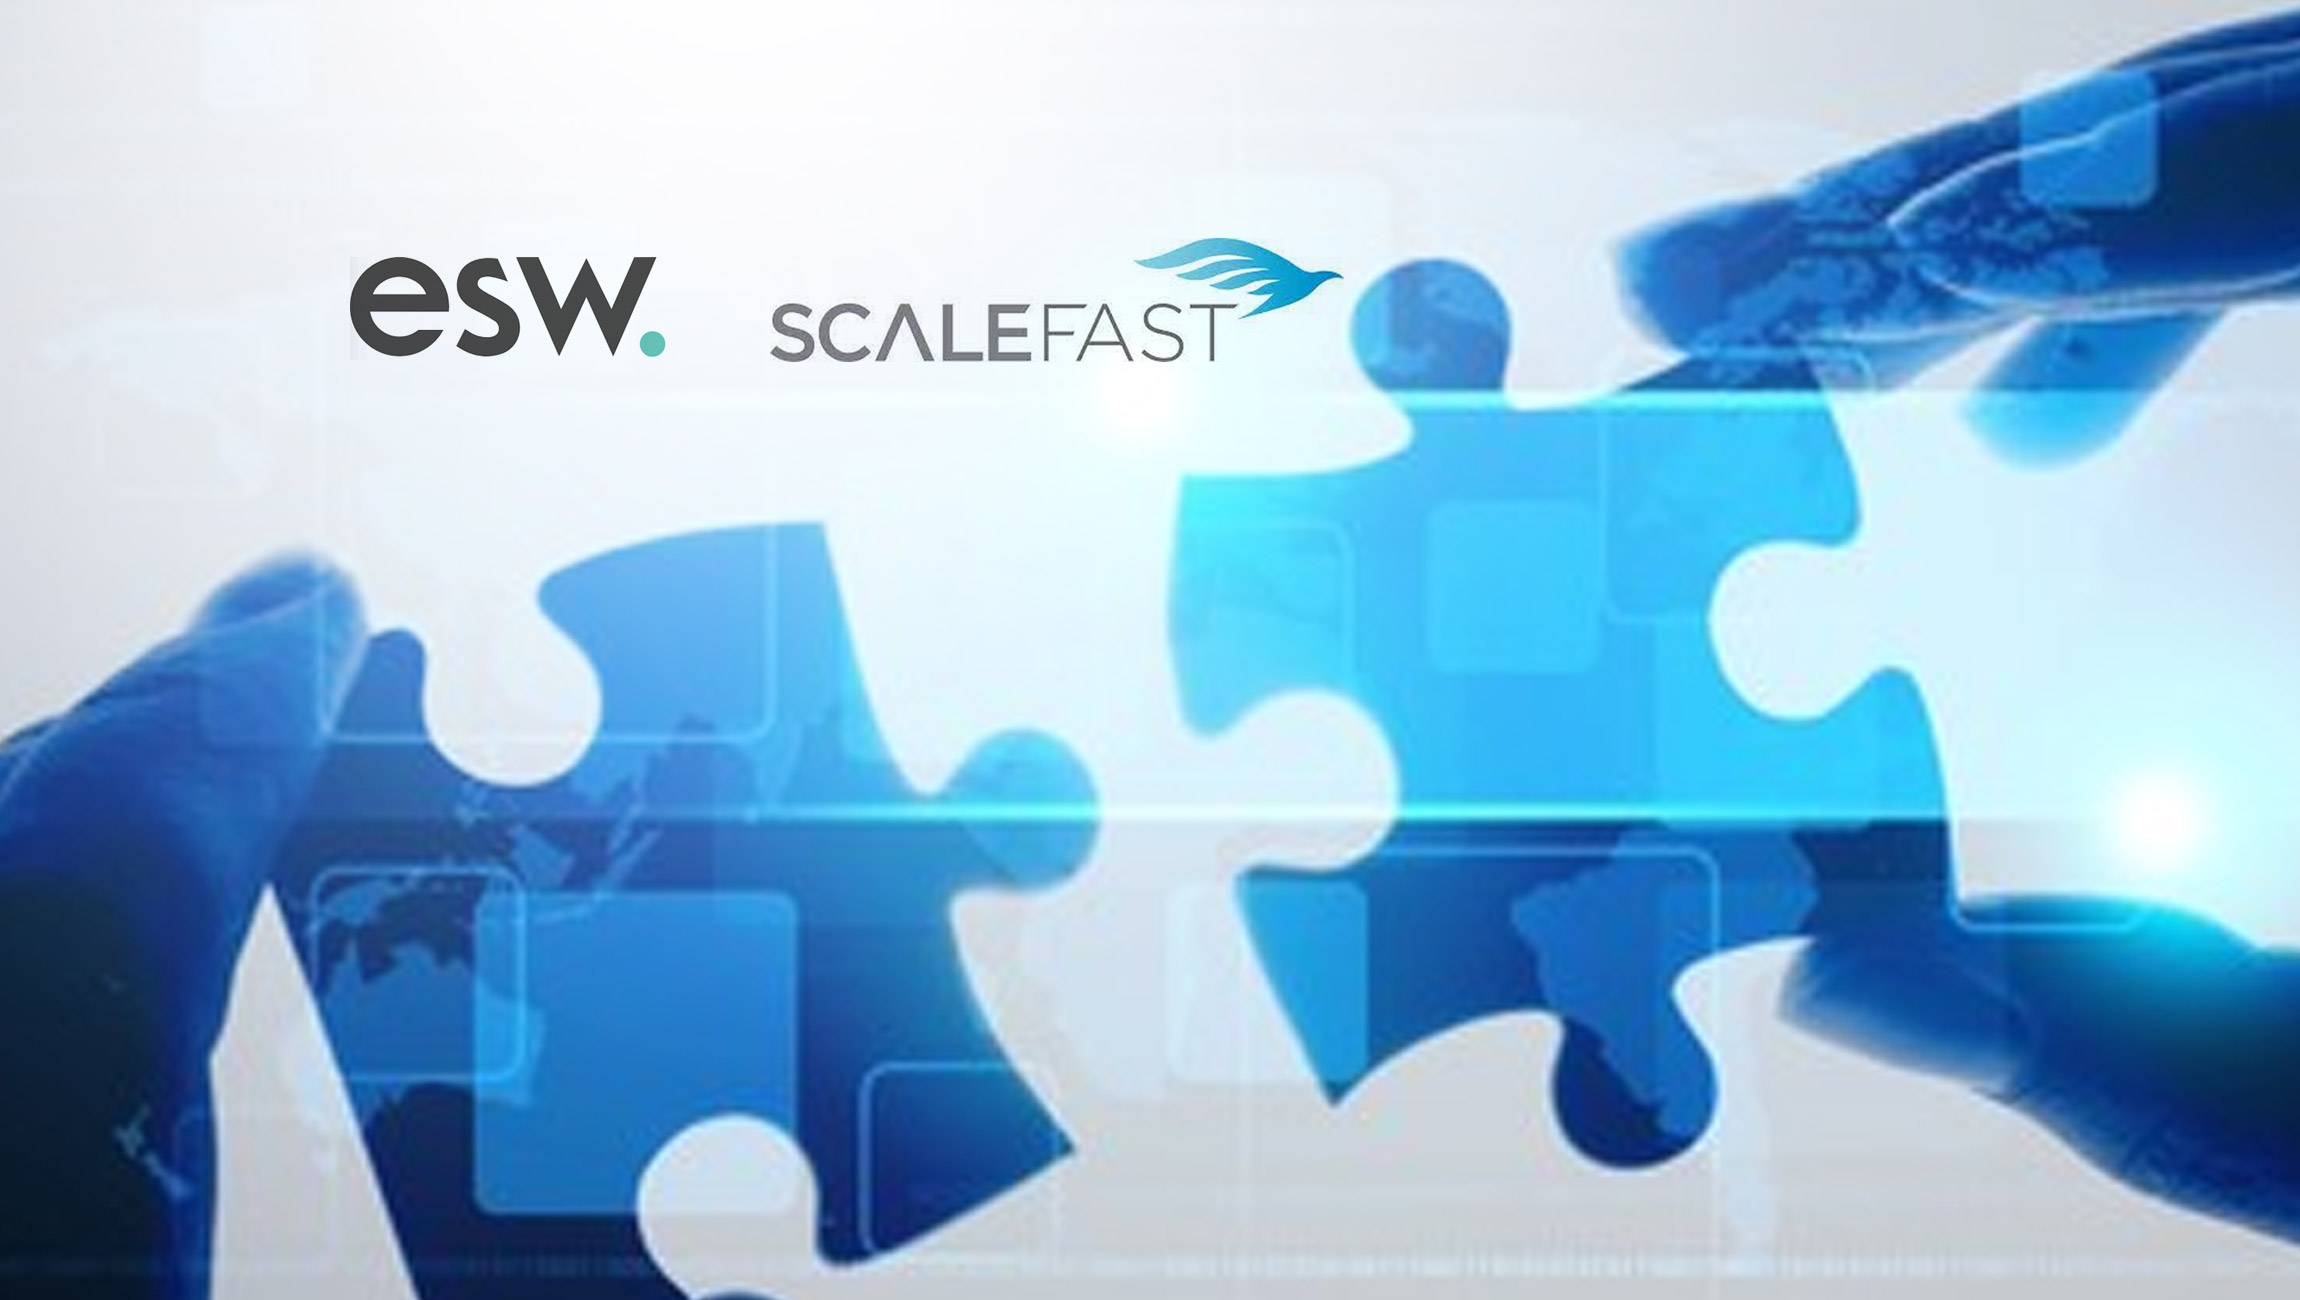 ESW Completes Acquisition of Scalefast